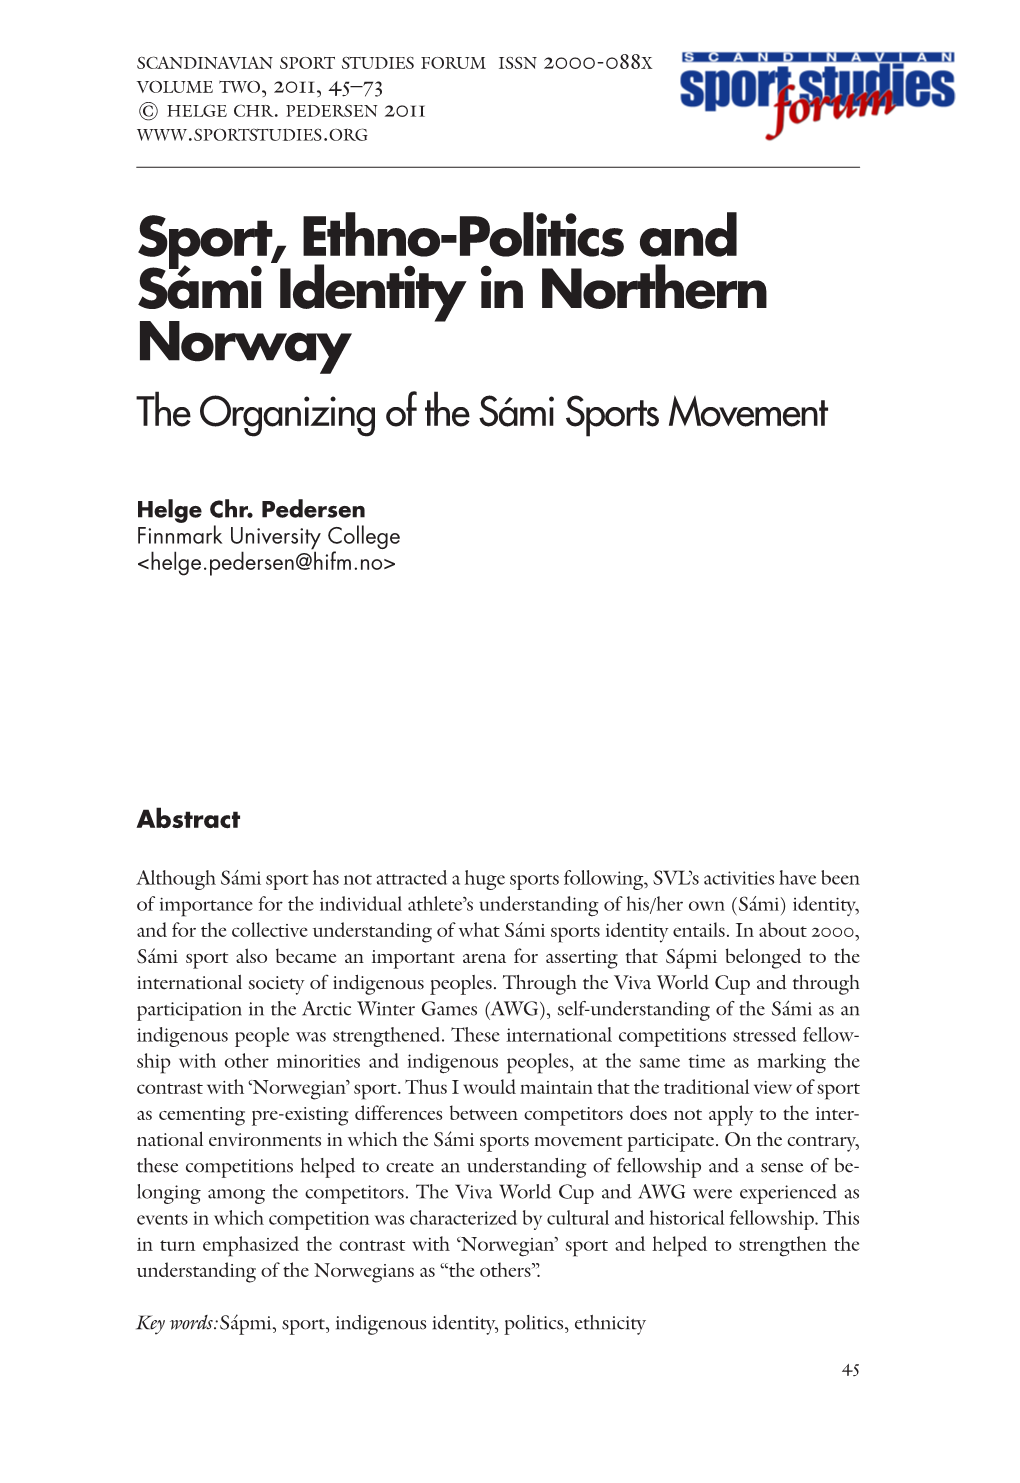 Sport, Ethno-Politics and Sámi Identity in Northern Norway the Organizing of the Sámi Sports Movement